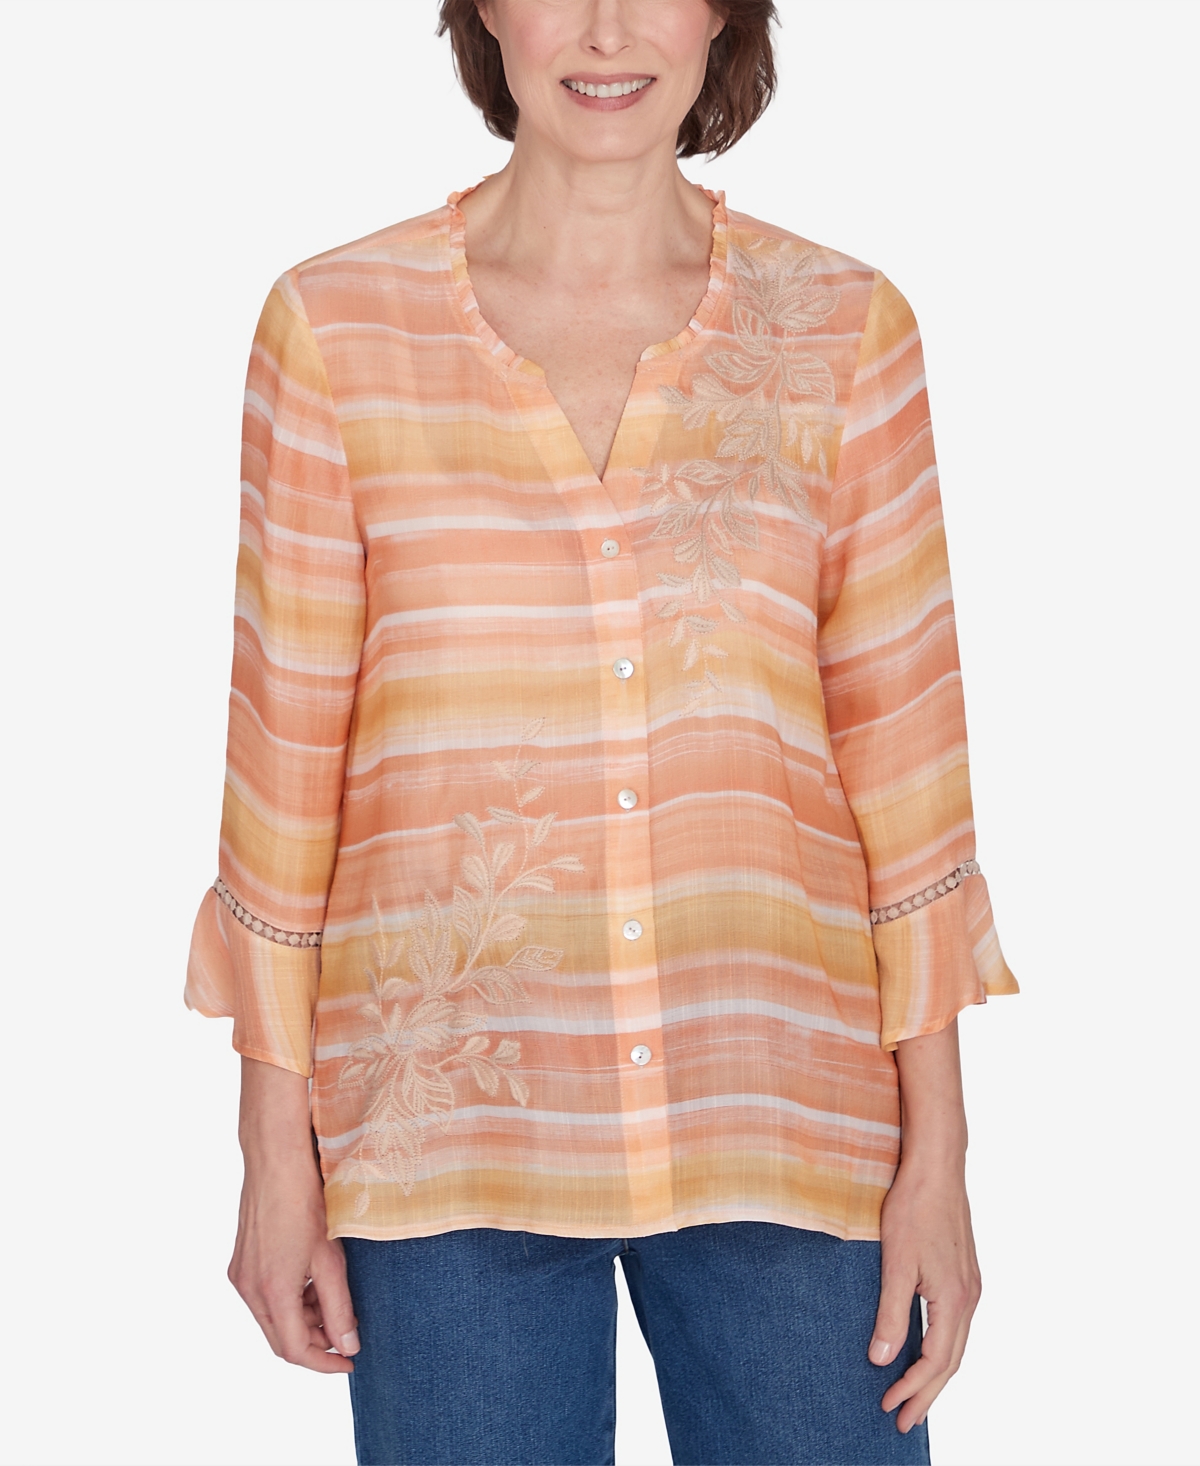 Petite Scottsdale Warm Stripe Floral Embroidered Top - Apricot